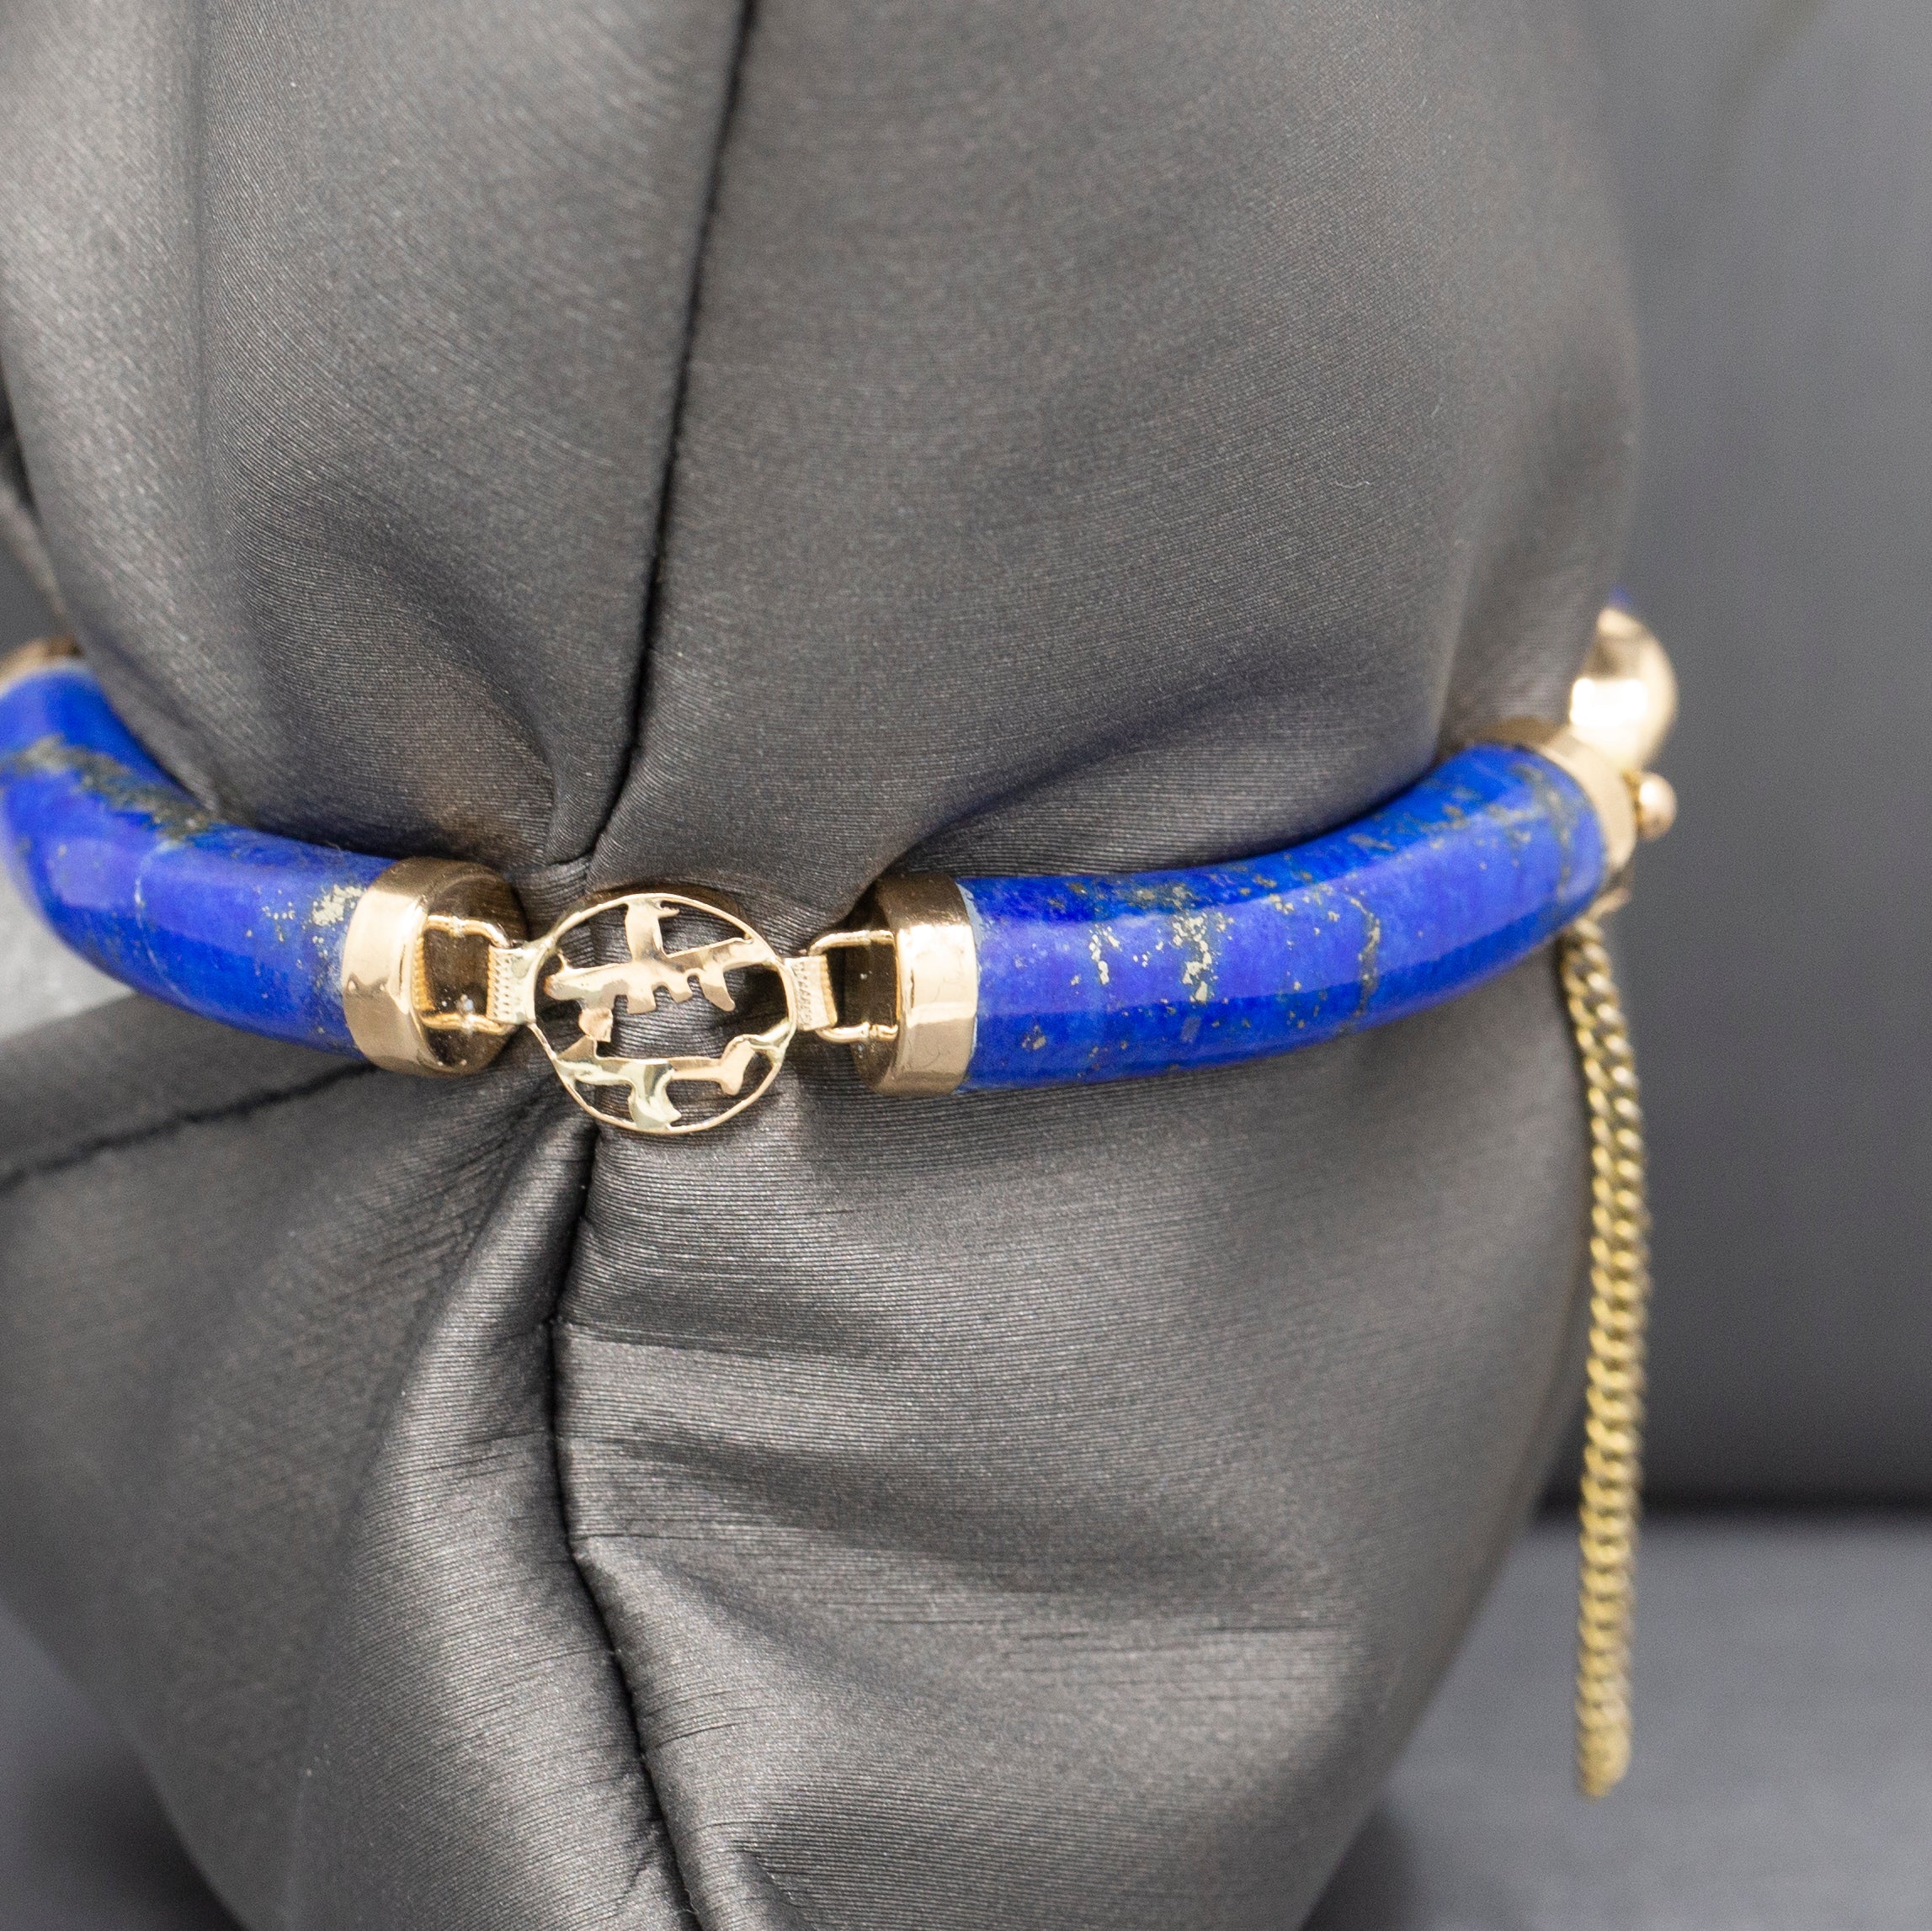 Vintage Lapis Lazuli Section Bracelet with Chinese Characters in 14k Yellow Gold